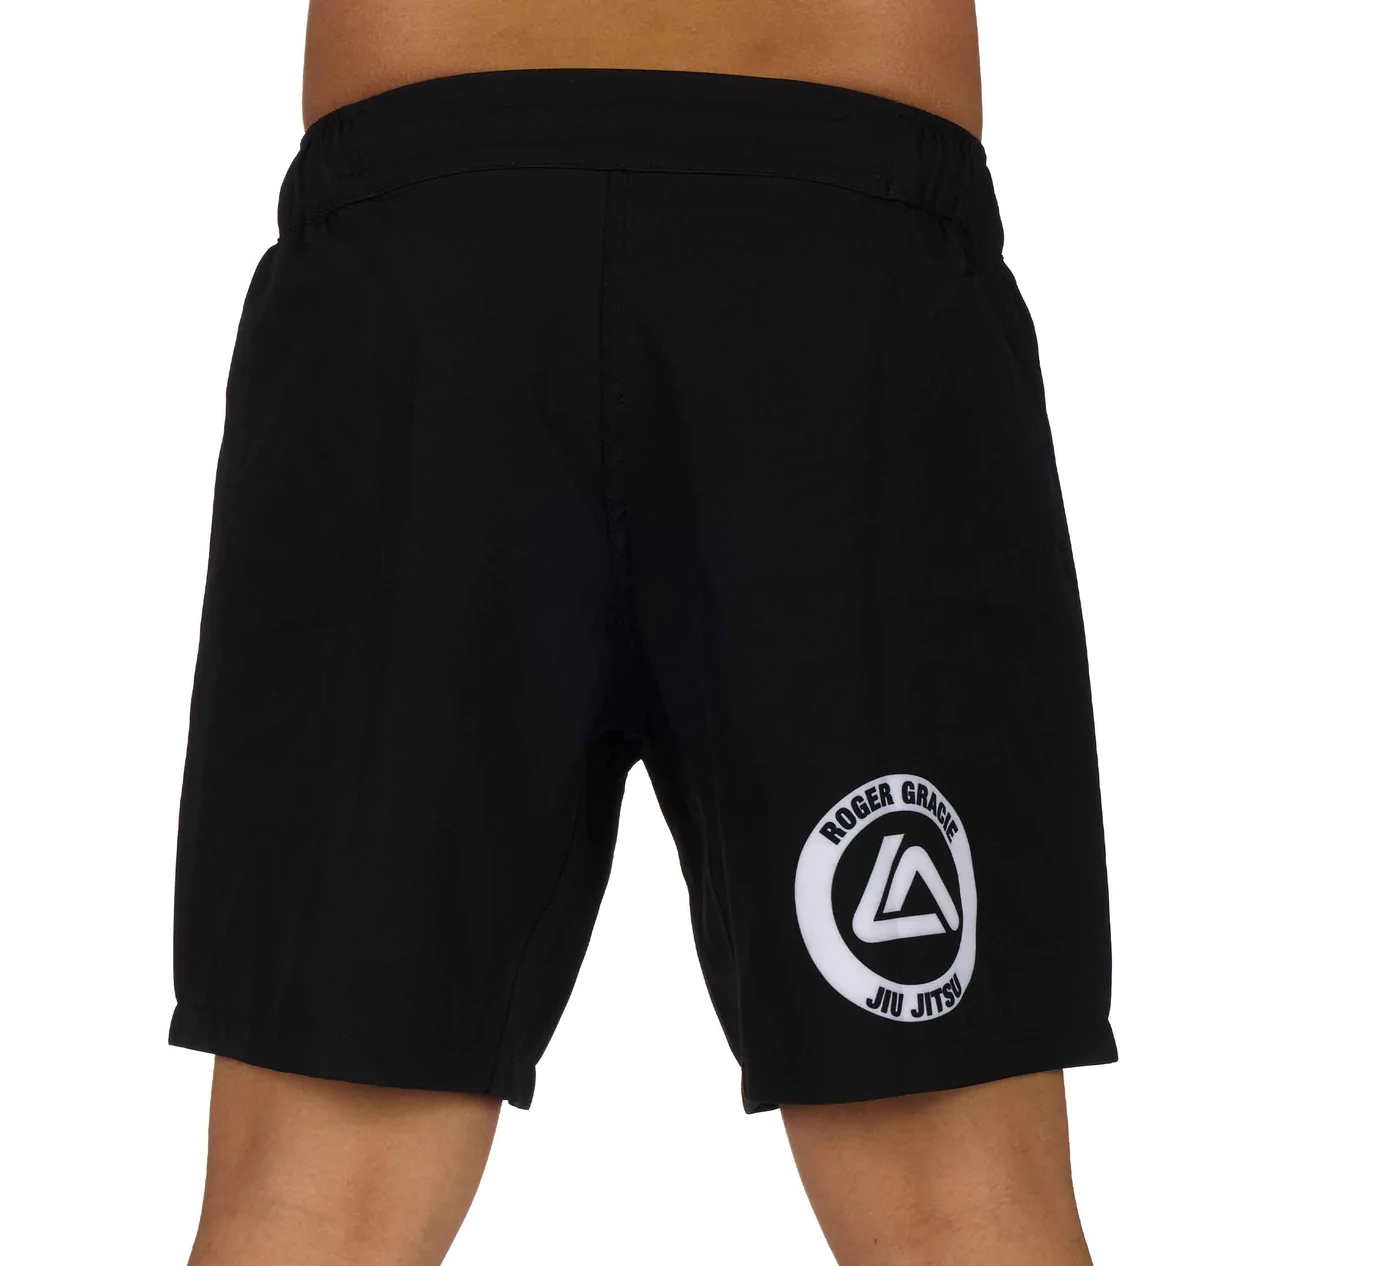 The back of Roger Gracie No Gi Fight Shorts for kids